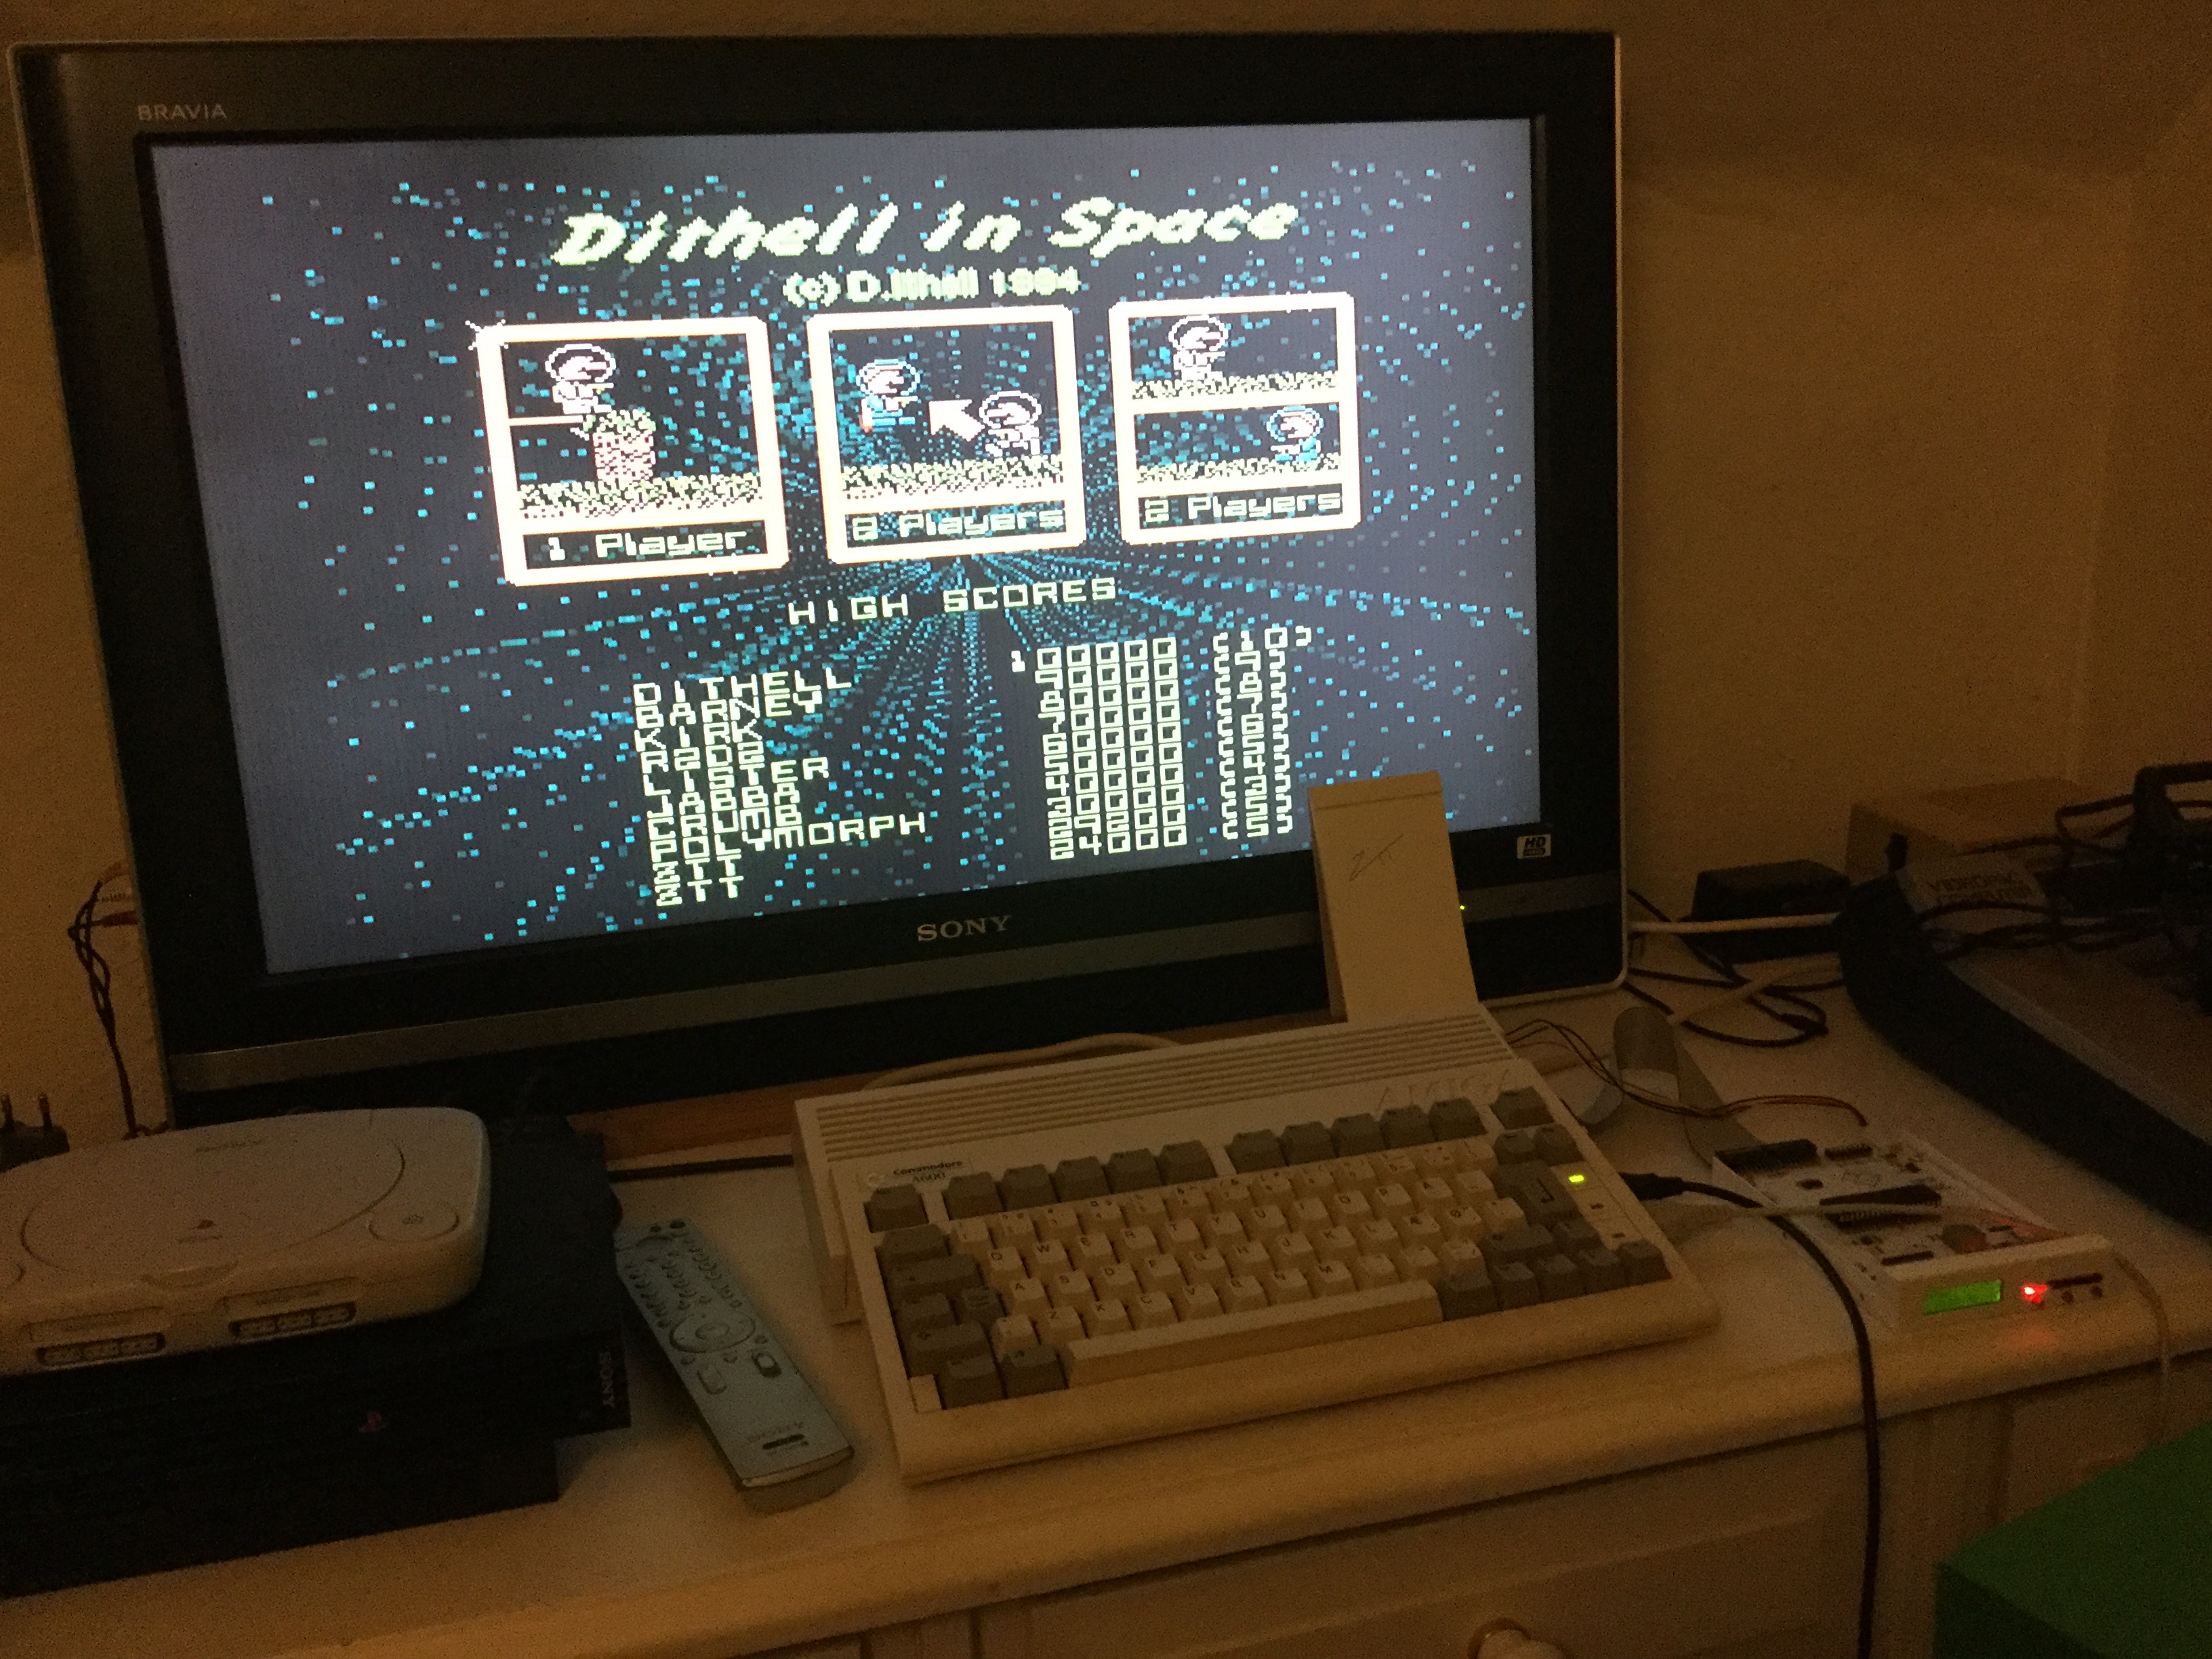 Frankie: Dithell in Space [Easy] (Amiga) 29,200 points on 2022-02-11 05:43:11